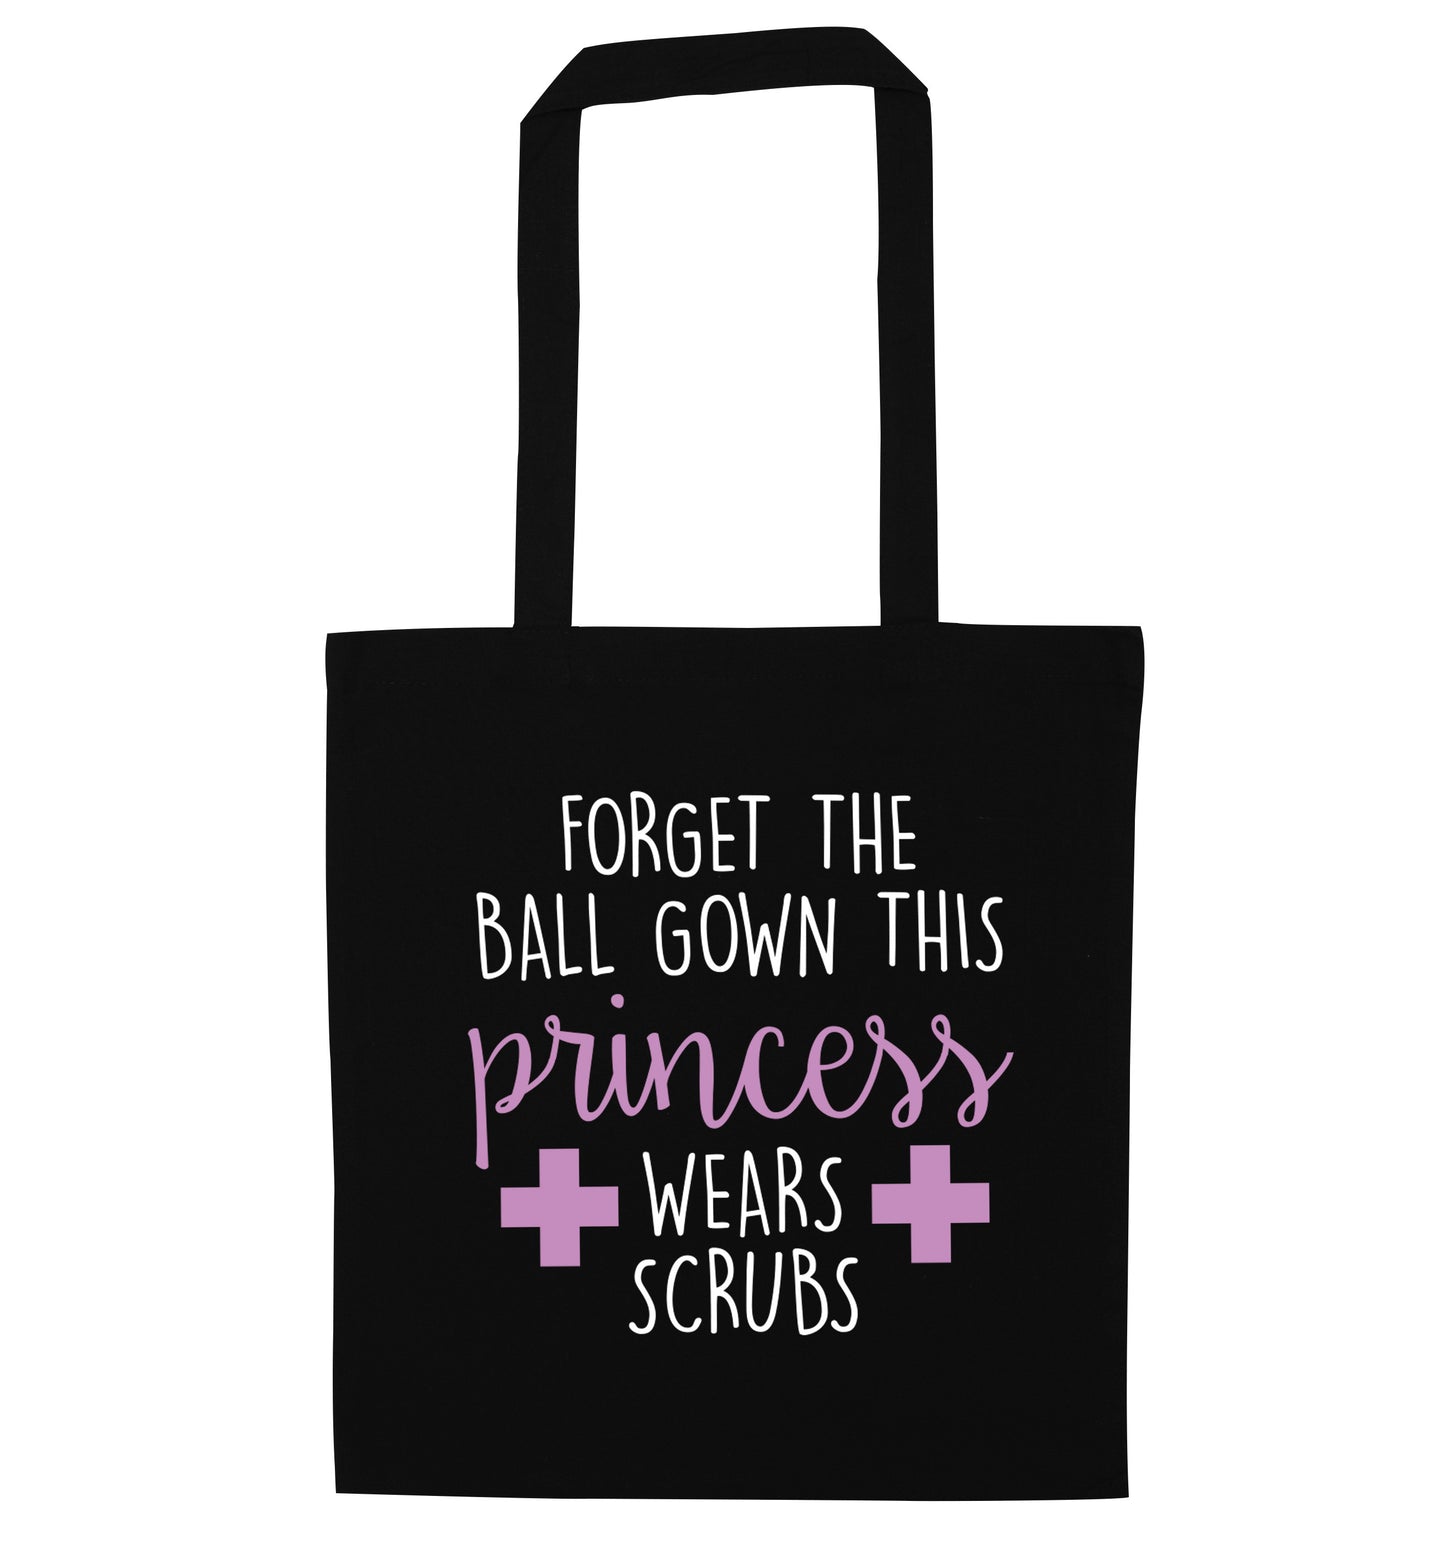 Forget the ball gown this princess wears scrubs black tote bag